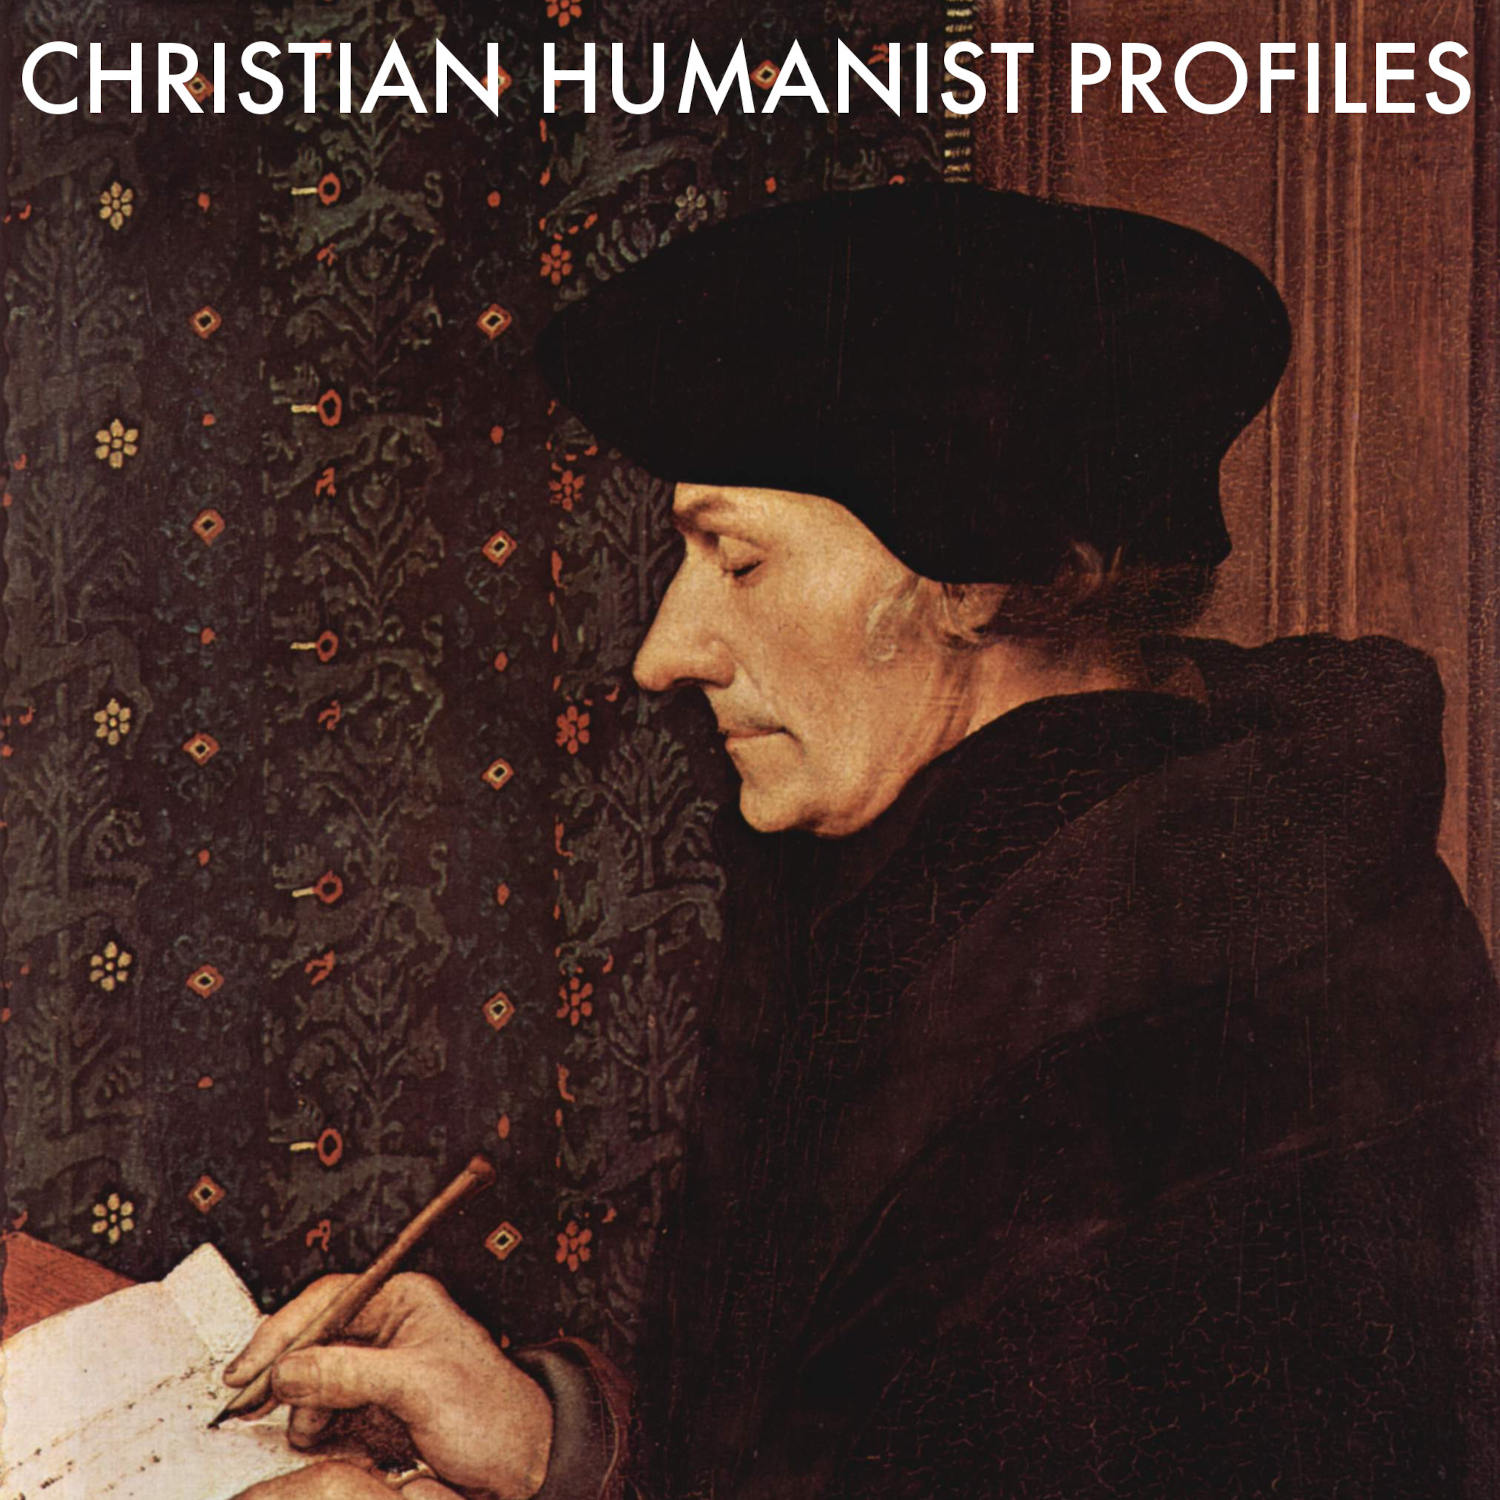 Christian Humanist Profiles 167: Ian Christopher Levy